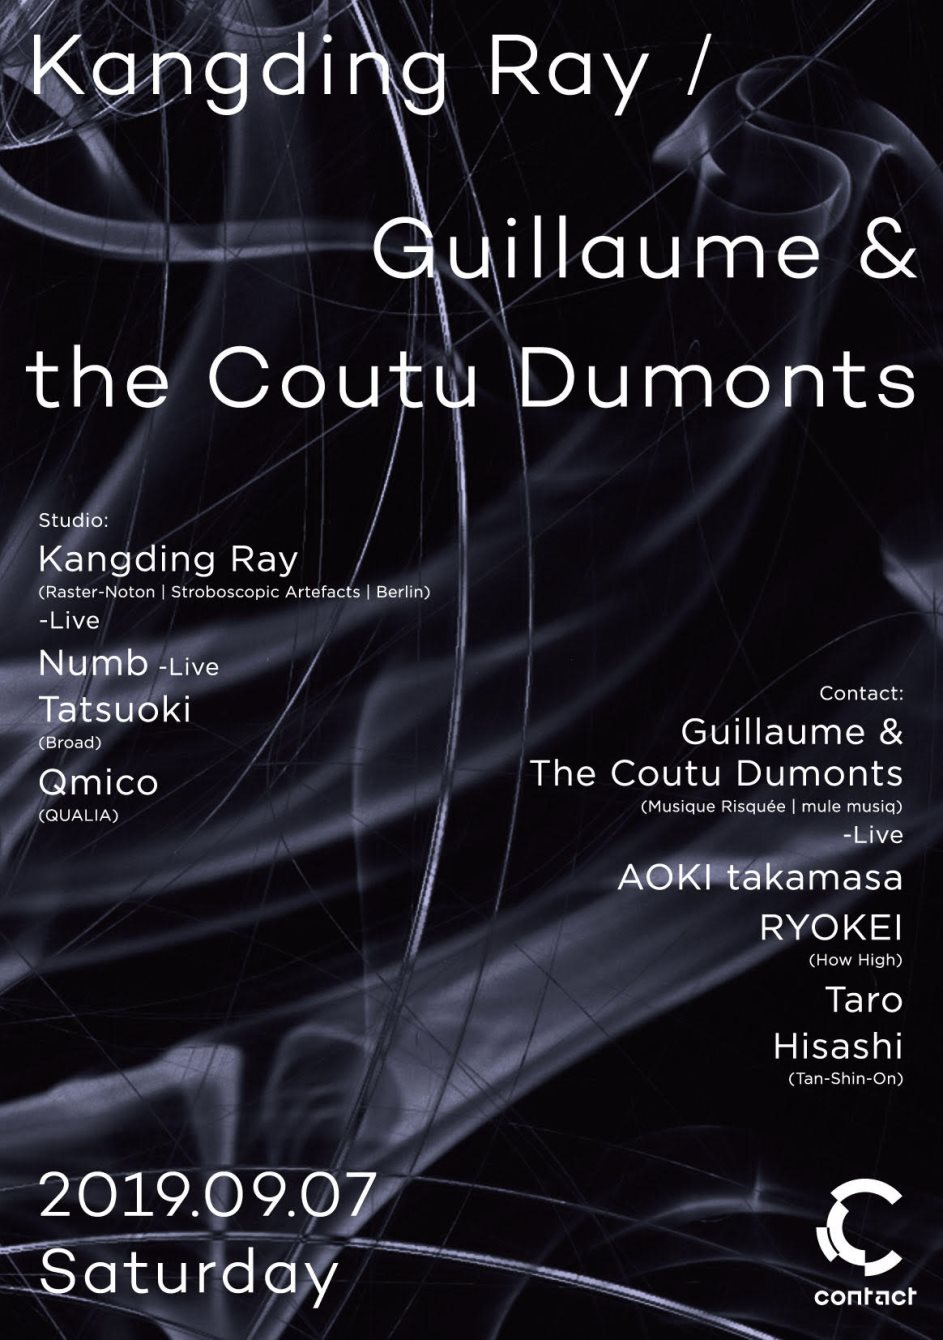 Kangding Ray / Guillaume & the Coutu Dumonts - Flyer front